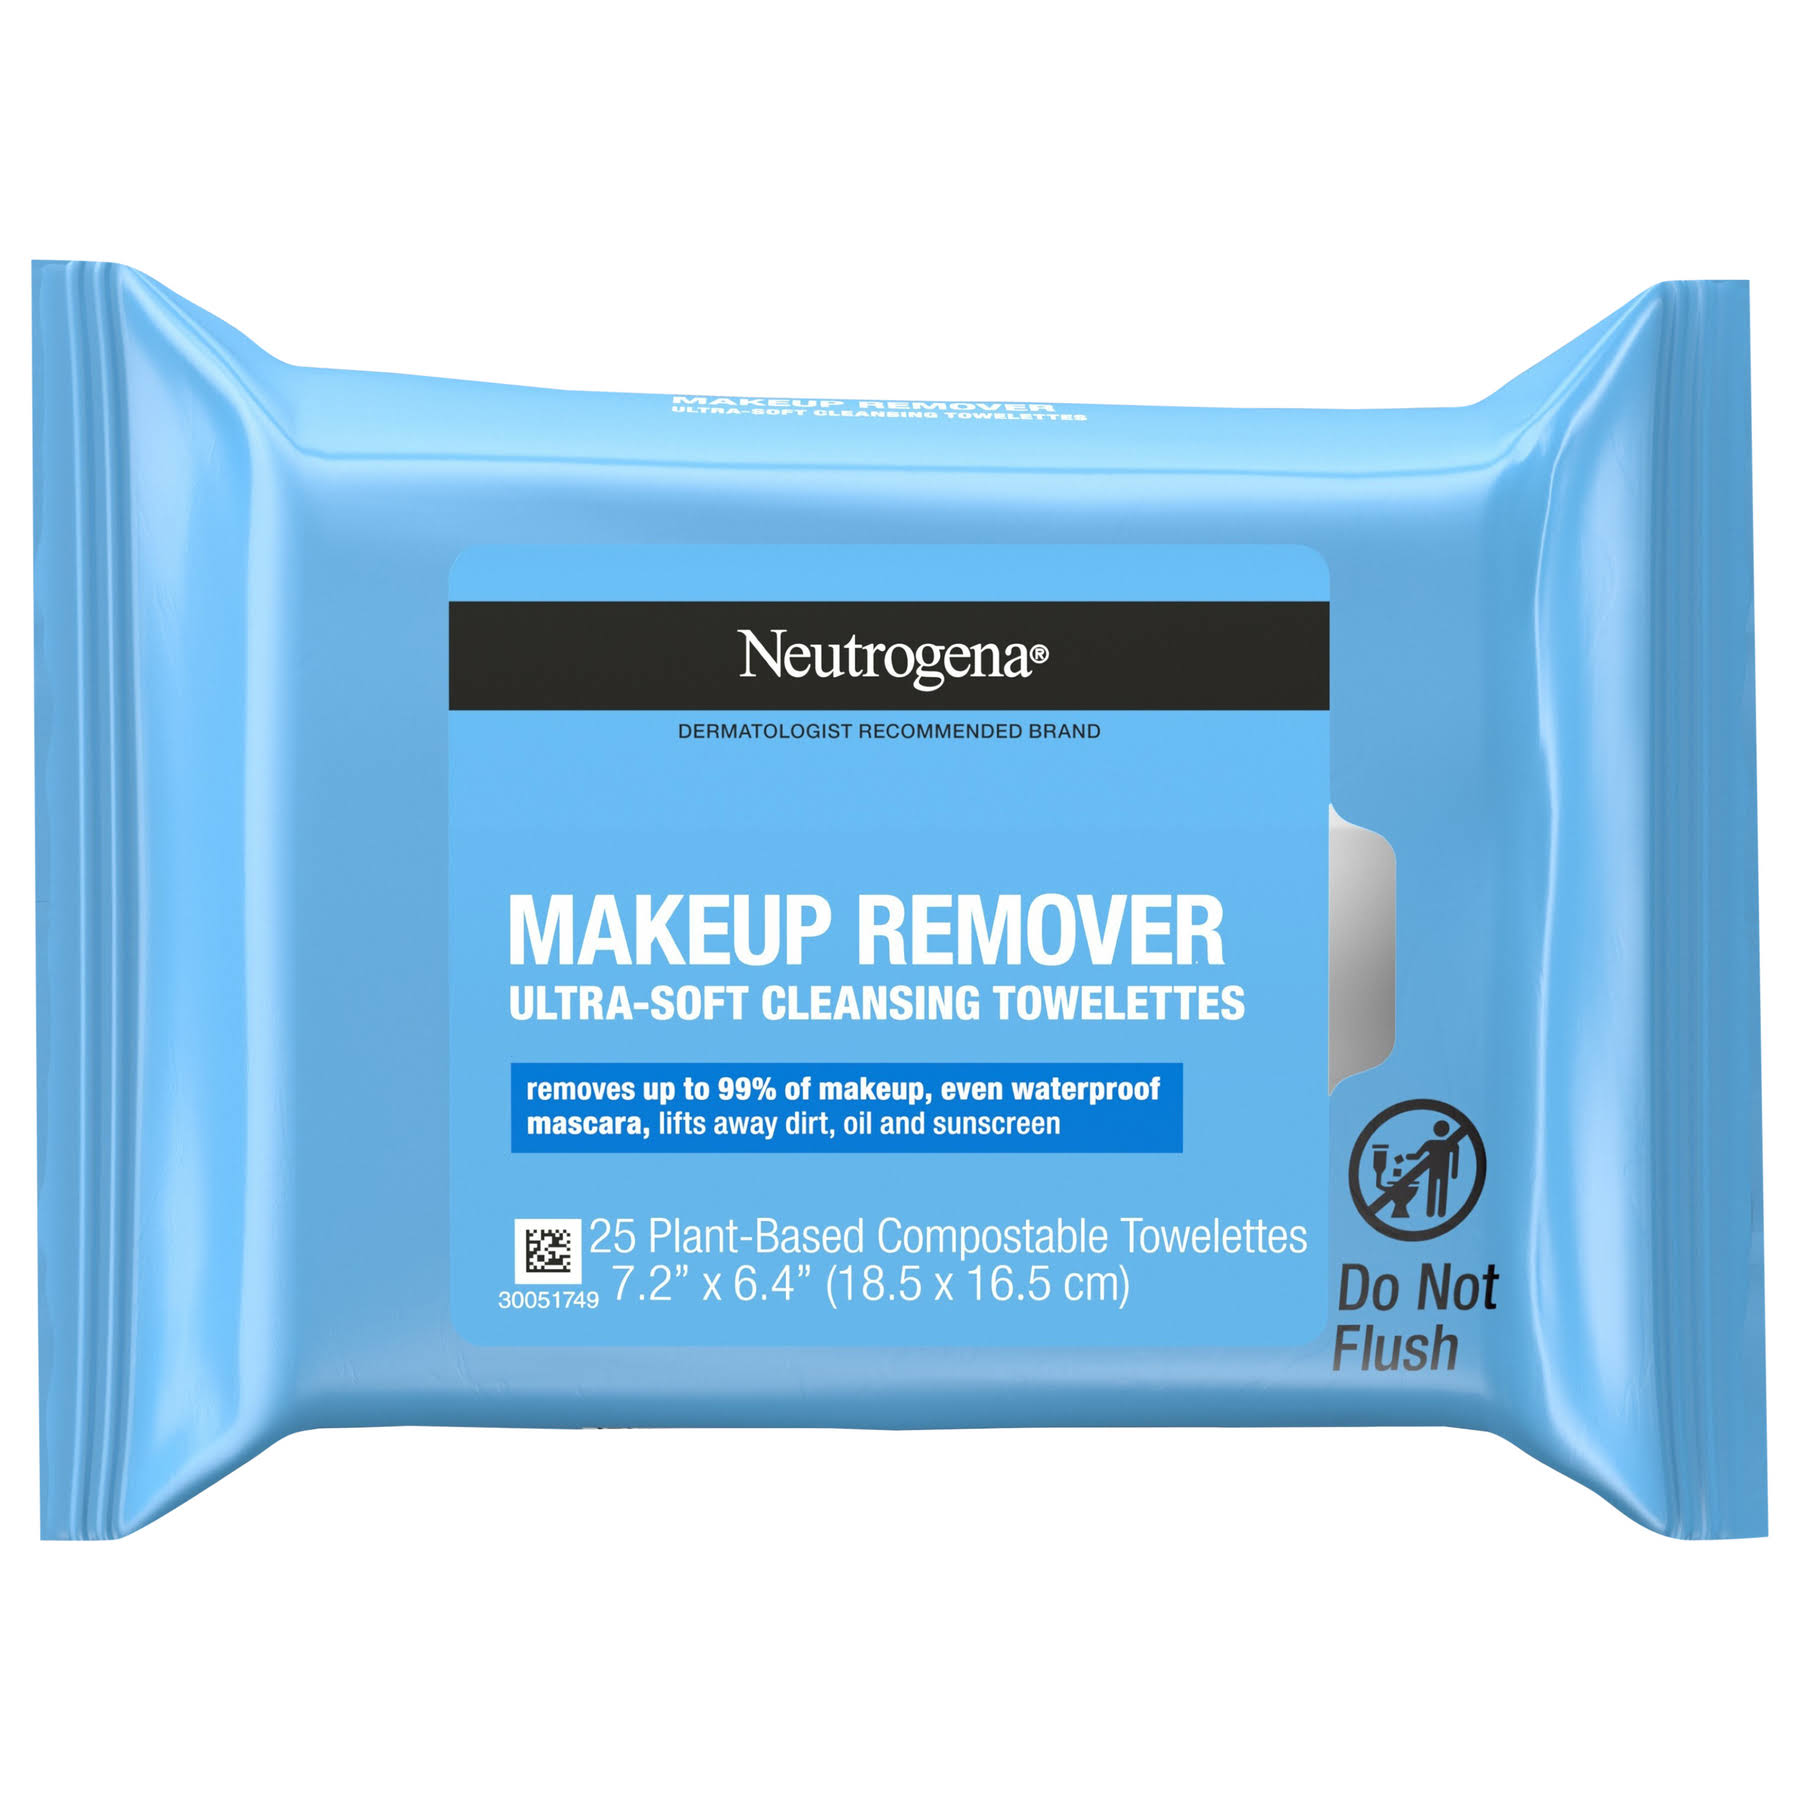 Neutrogena Makeup Remover Cleansing Towelettes